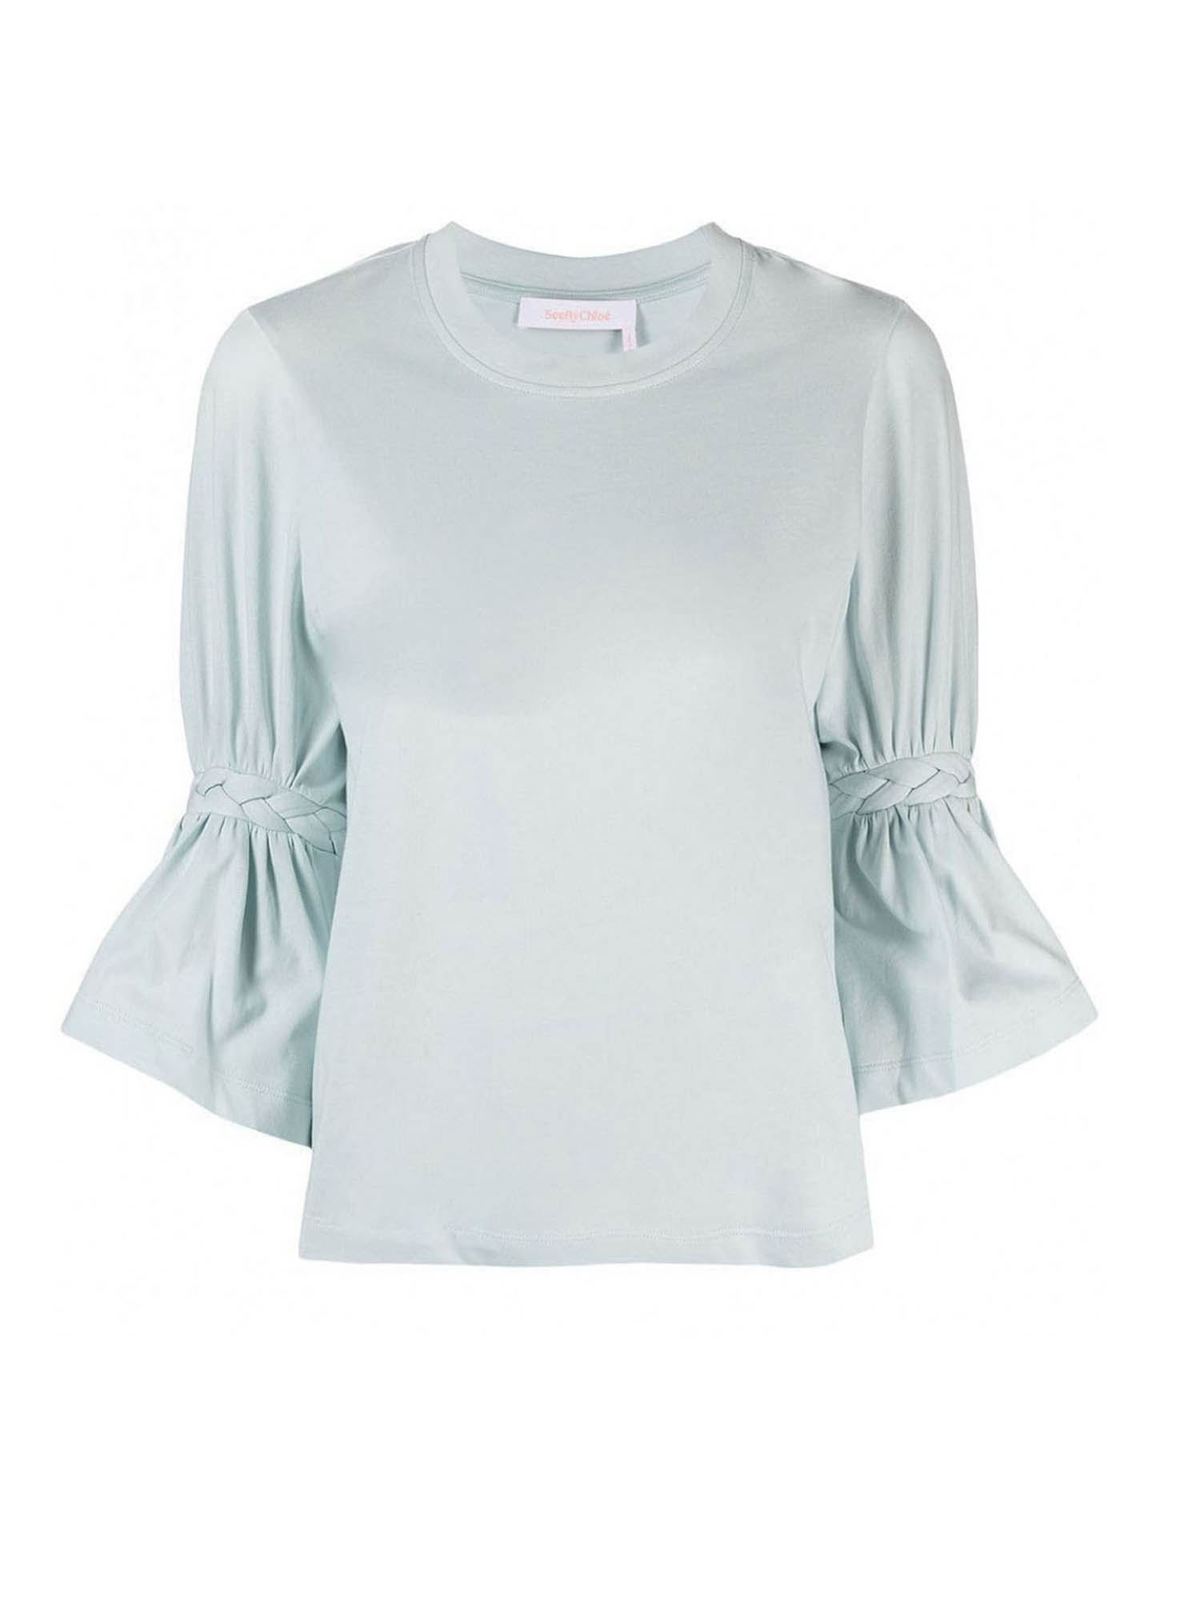 See by Chloé - Braided details blouse in Cloudy Aqua - blouses ...